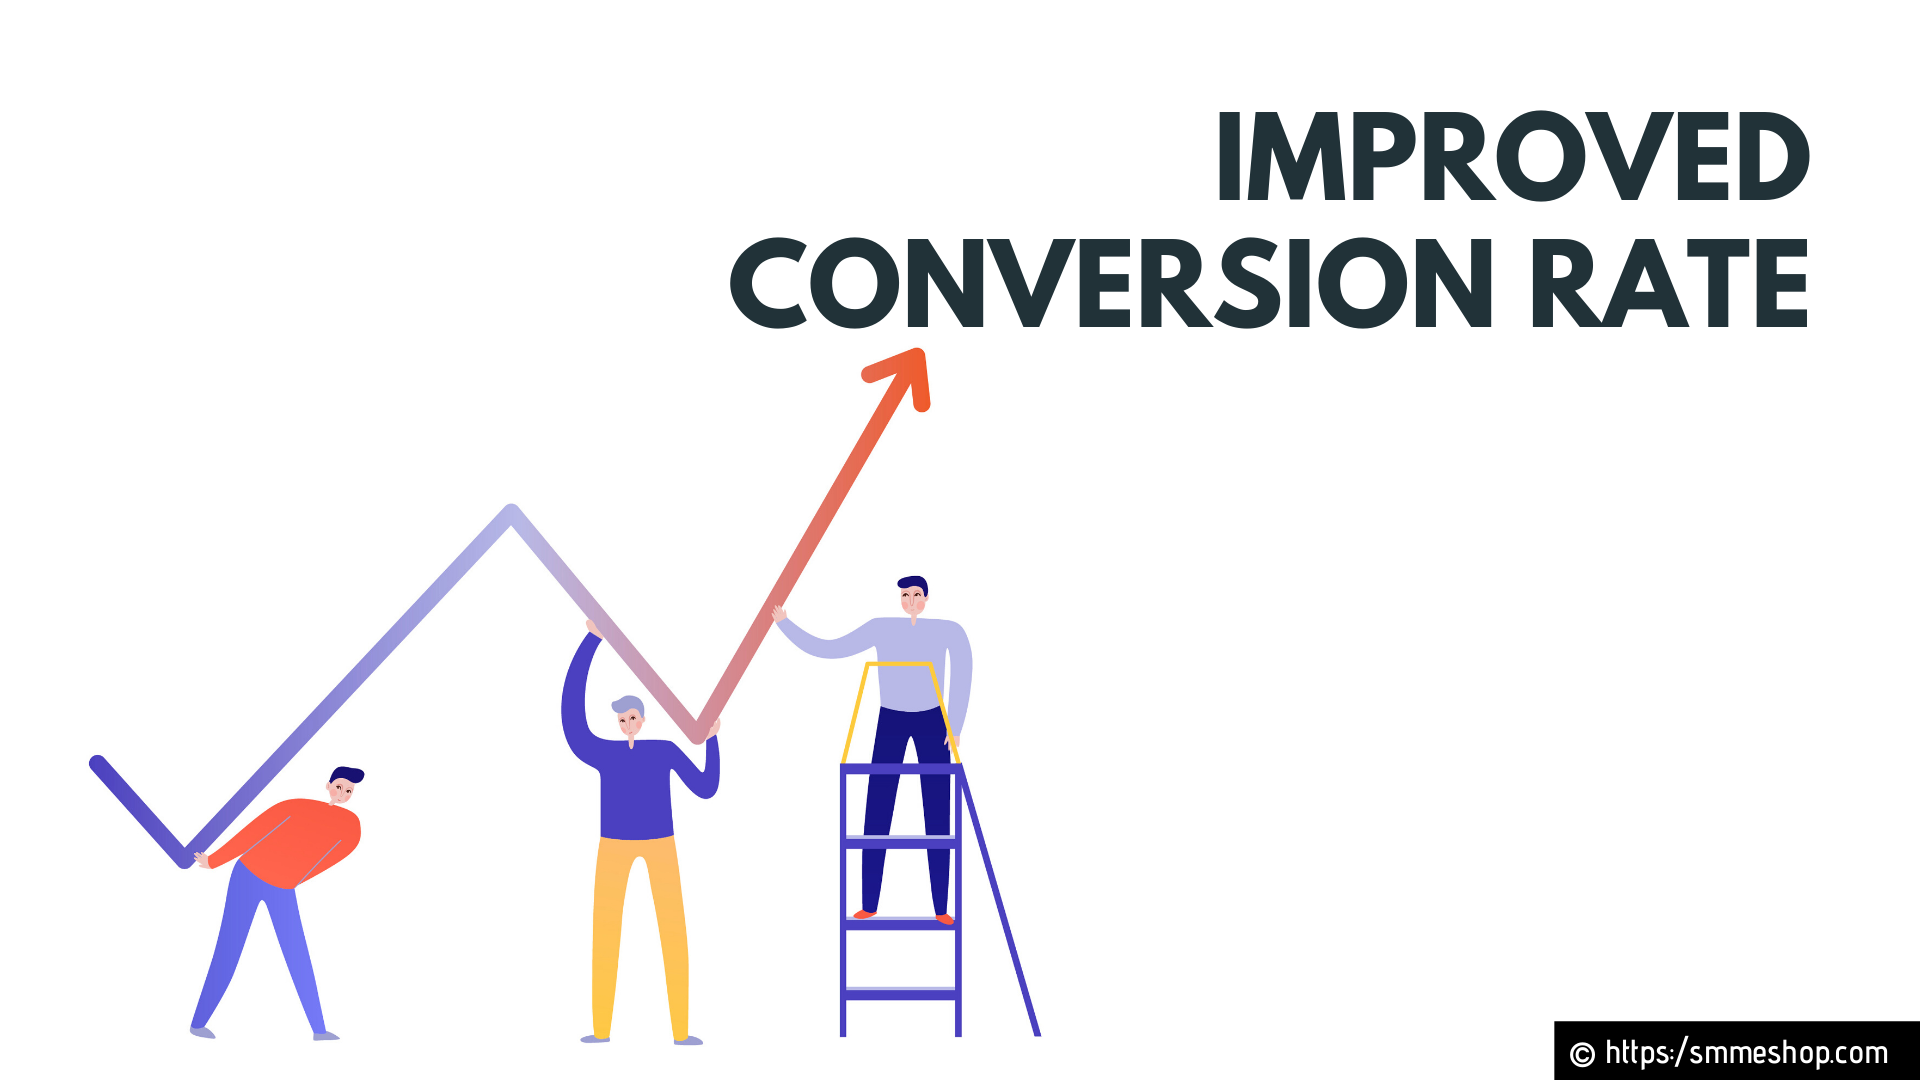 Improved conversion rate